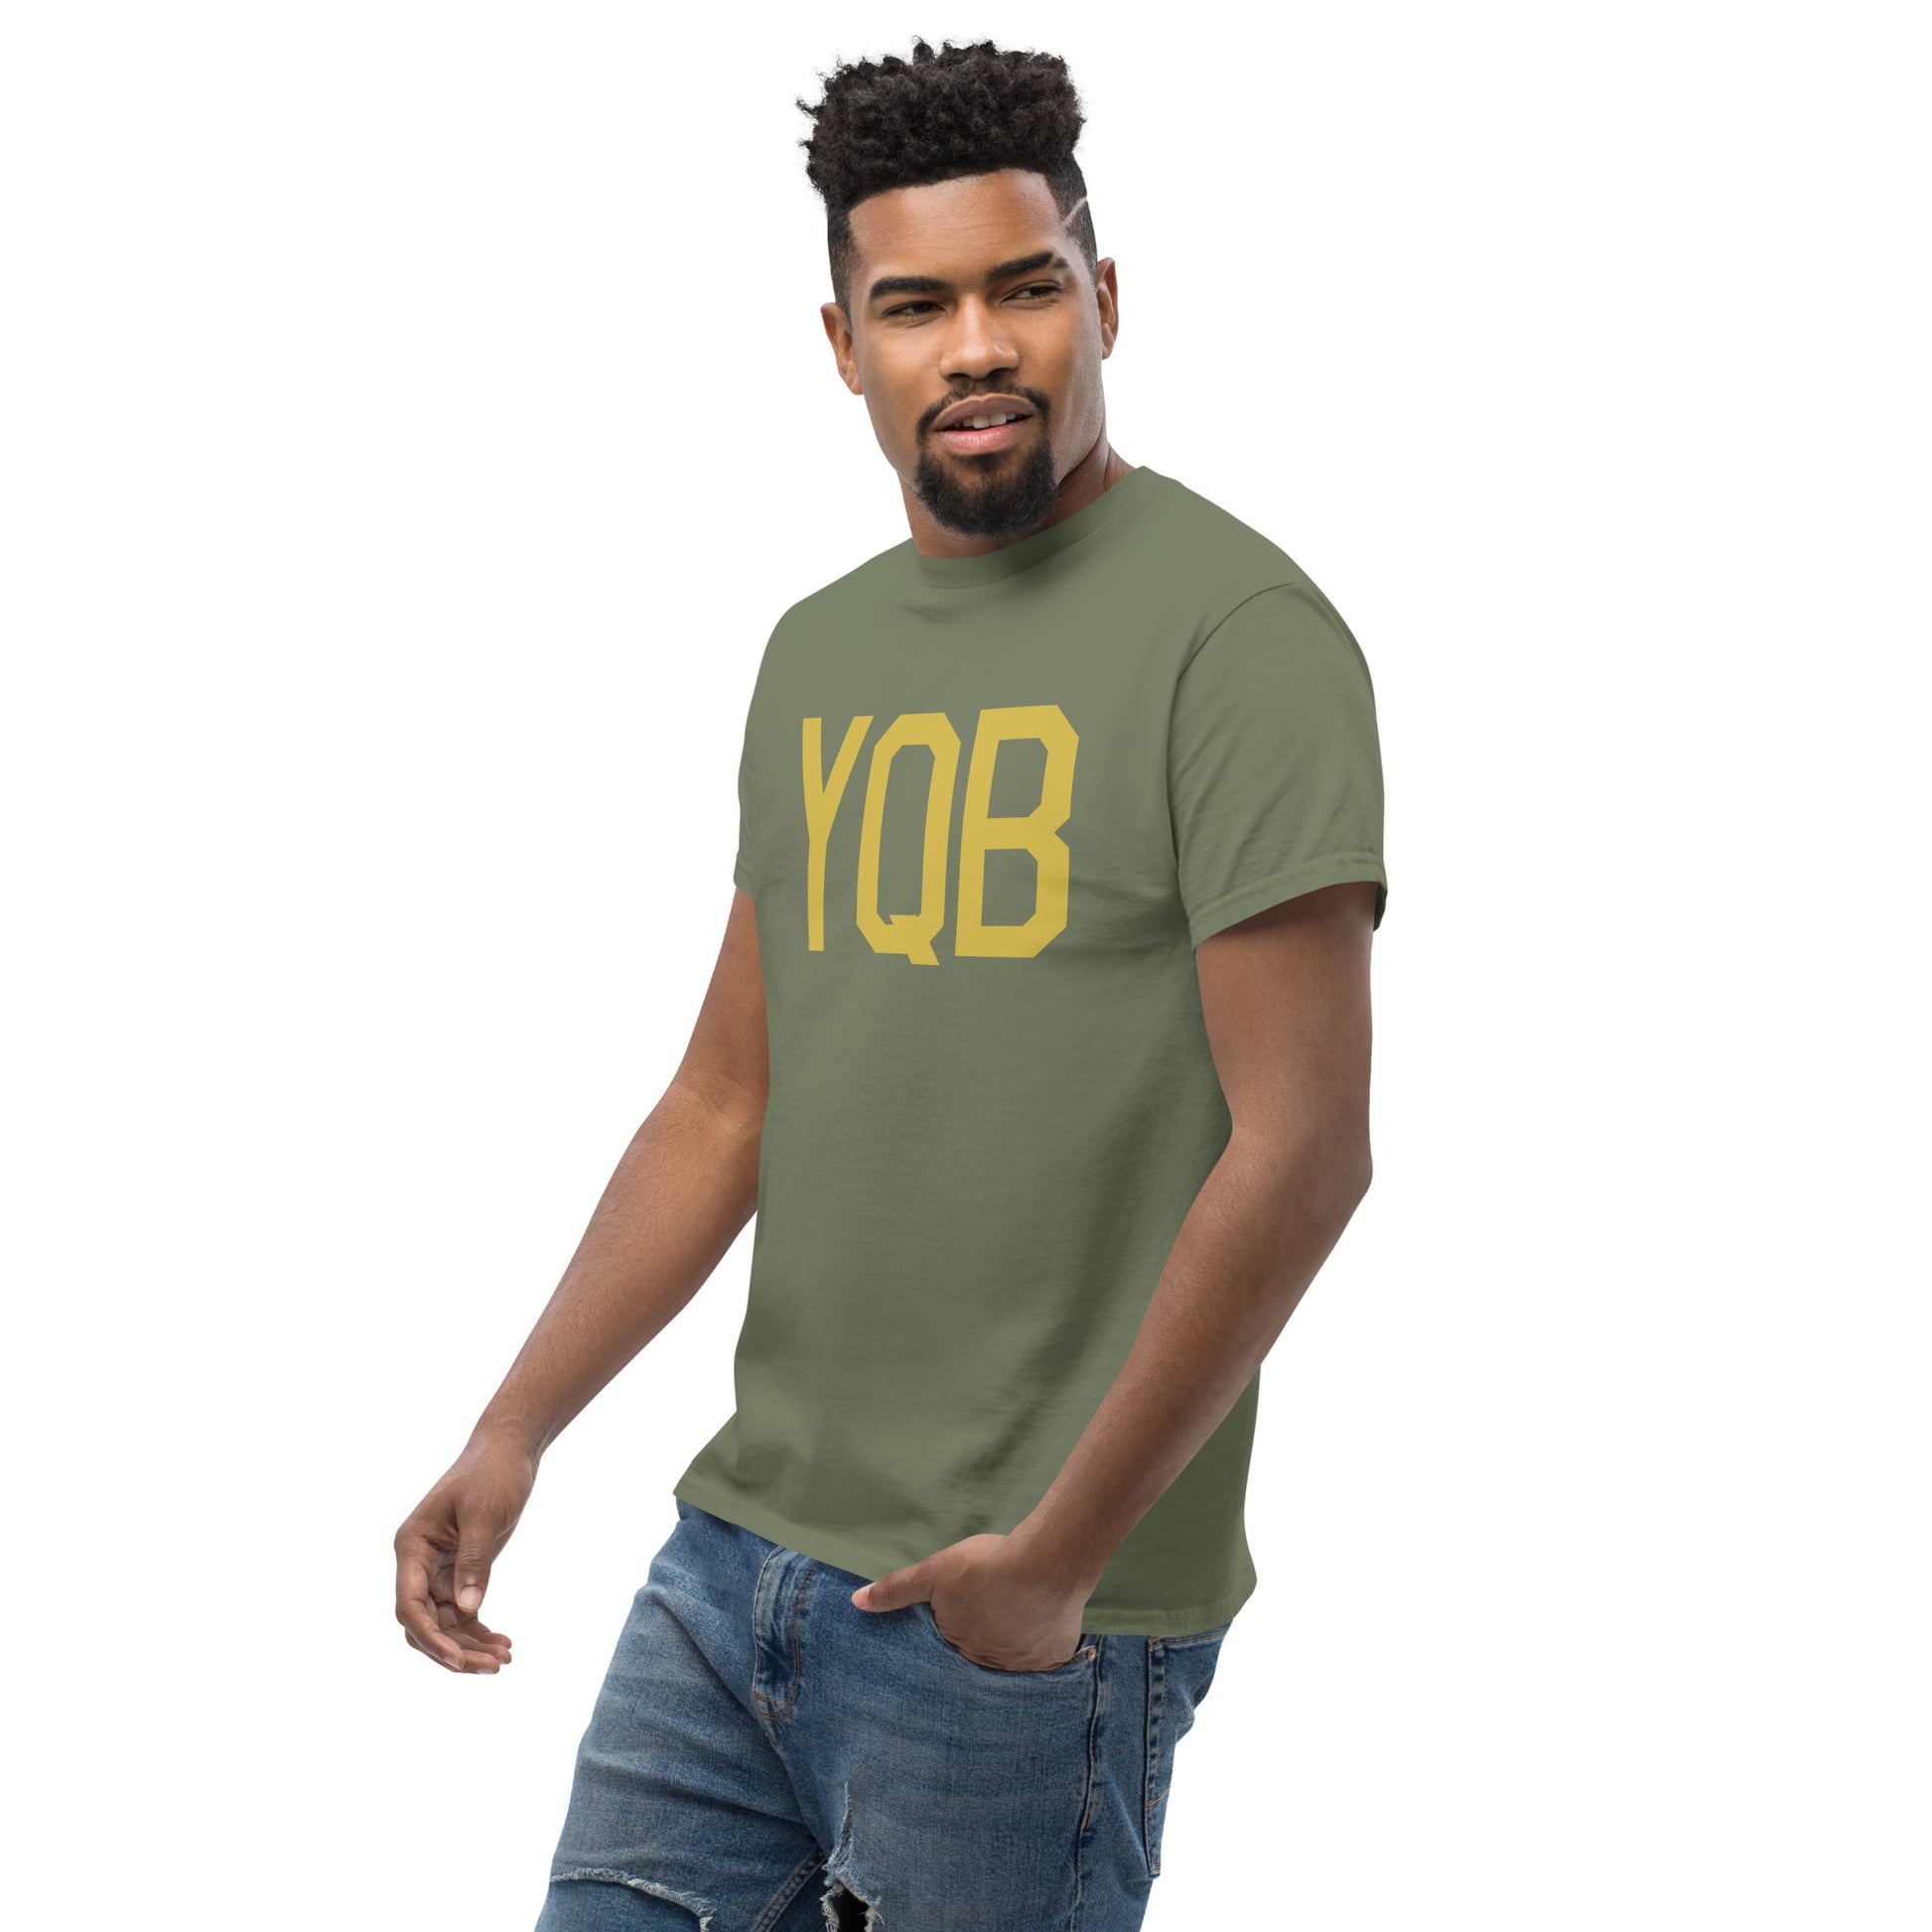 Aviation Enthusiast Men's Tee - Old Gold Graphic • YQB Quebec City • YHM Designs - Image 07